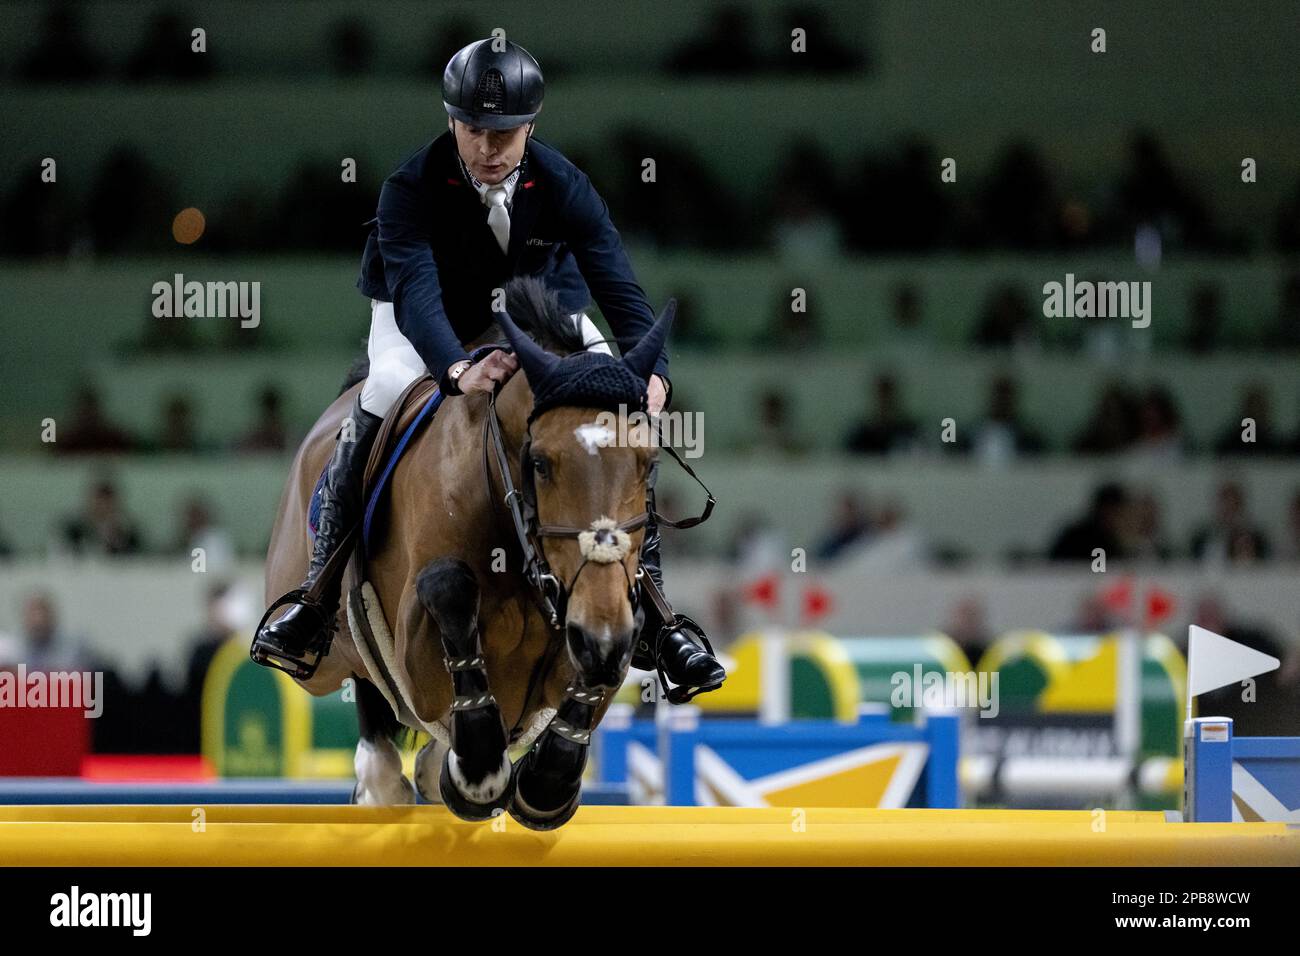 DEN BOSCH - Leopold van Asten (NED) on VDL Groep Nino Du Roton in action during the world cup show jumping, during The Dutch Masters Indoor Brabant Horse Show. ANP SANDER KONING netherlands out - belgium out Stock Photo